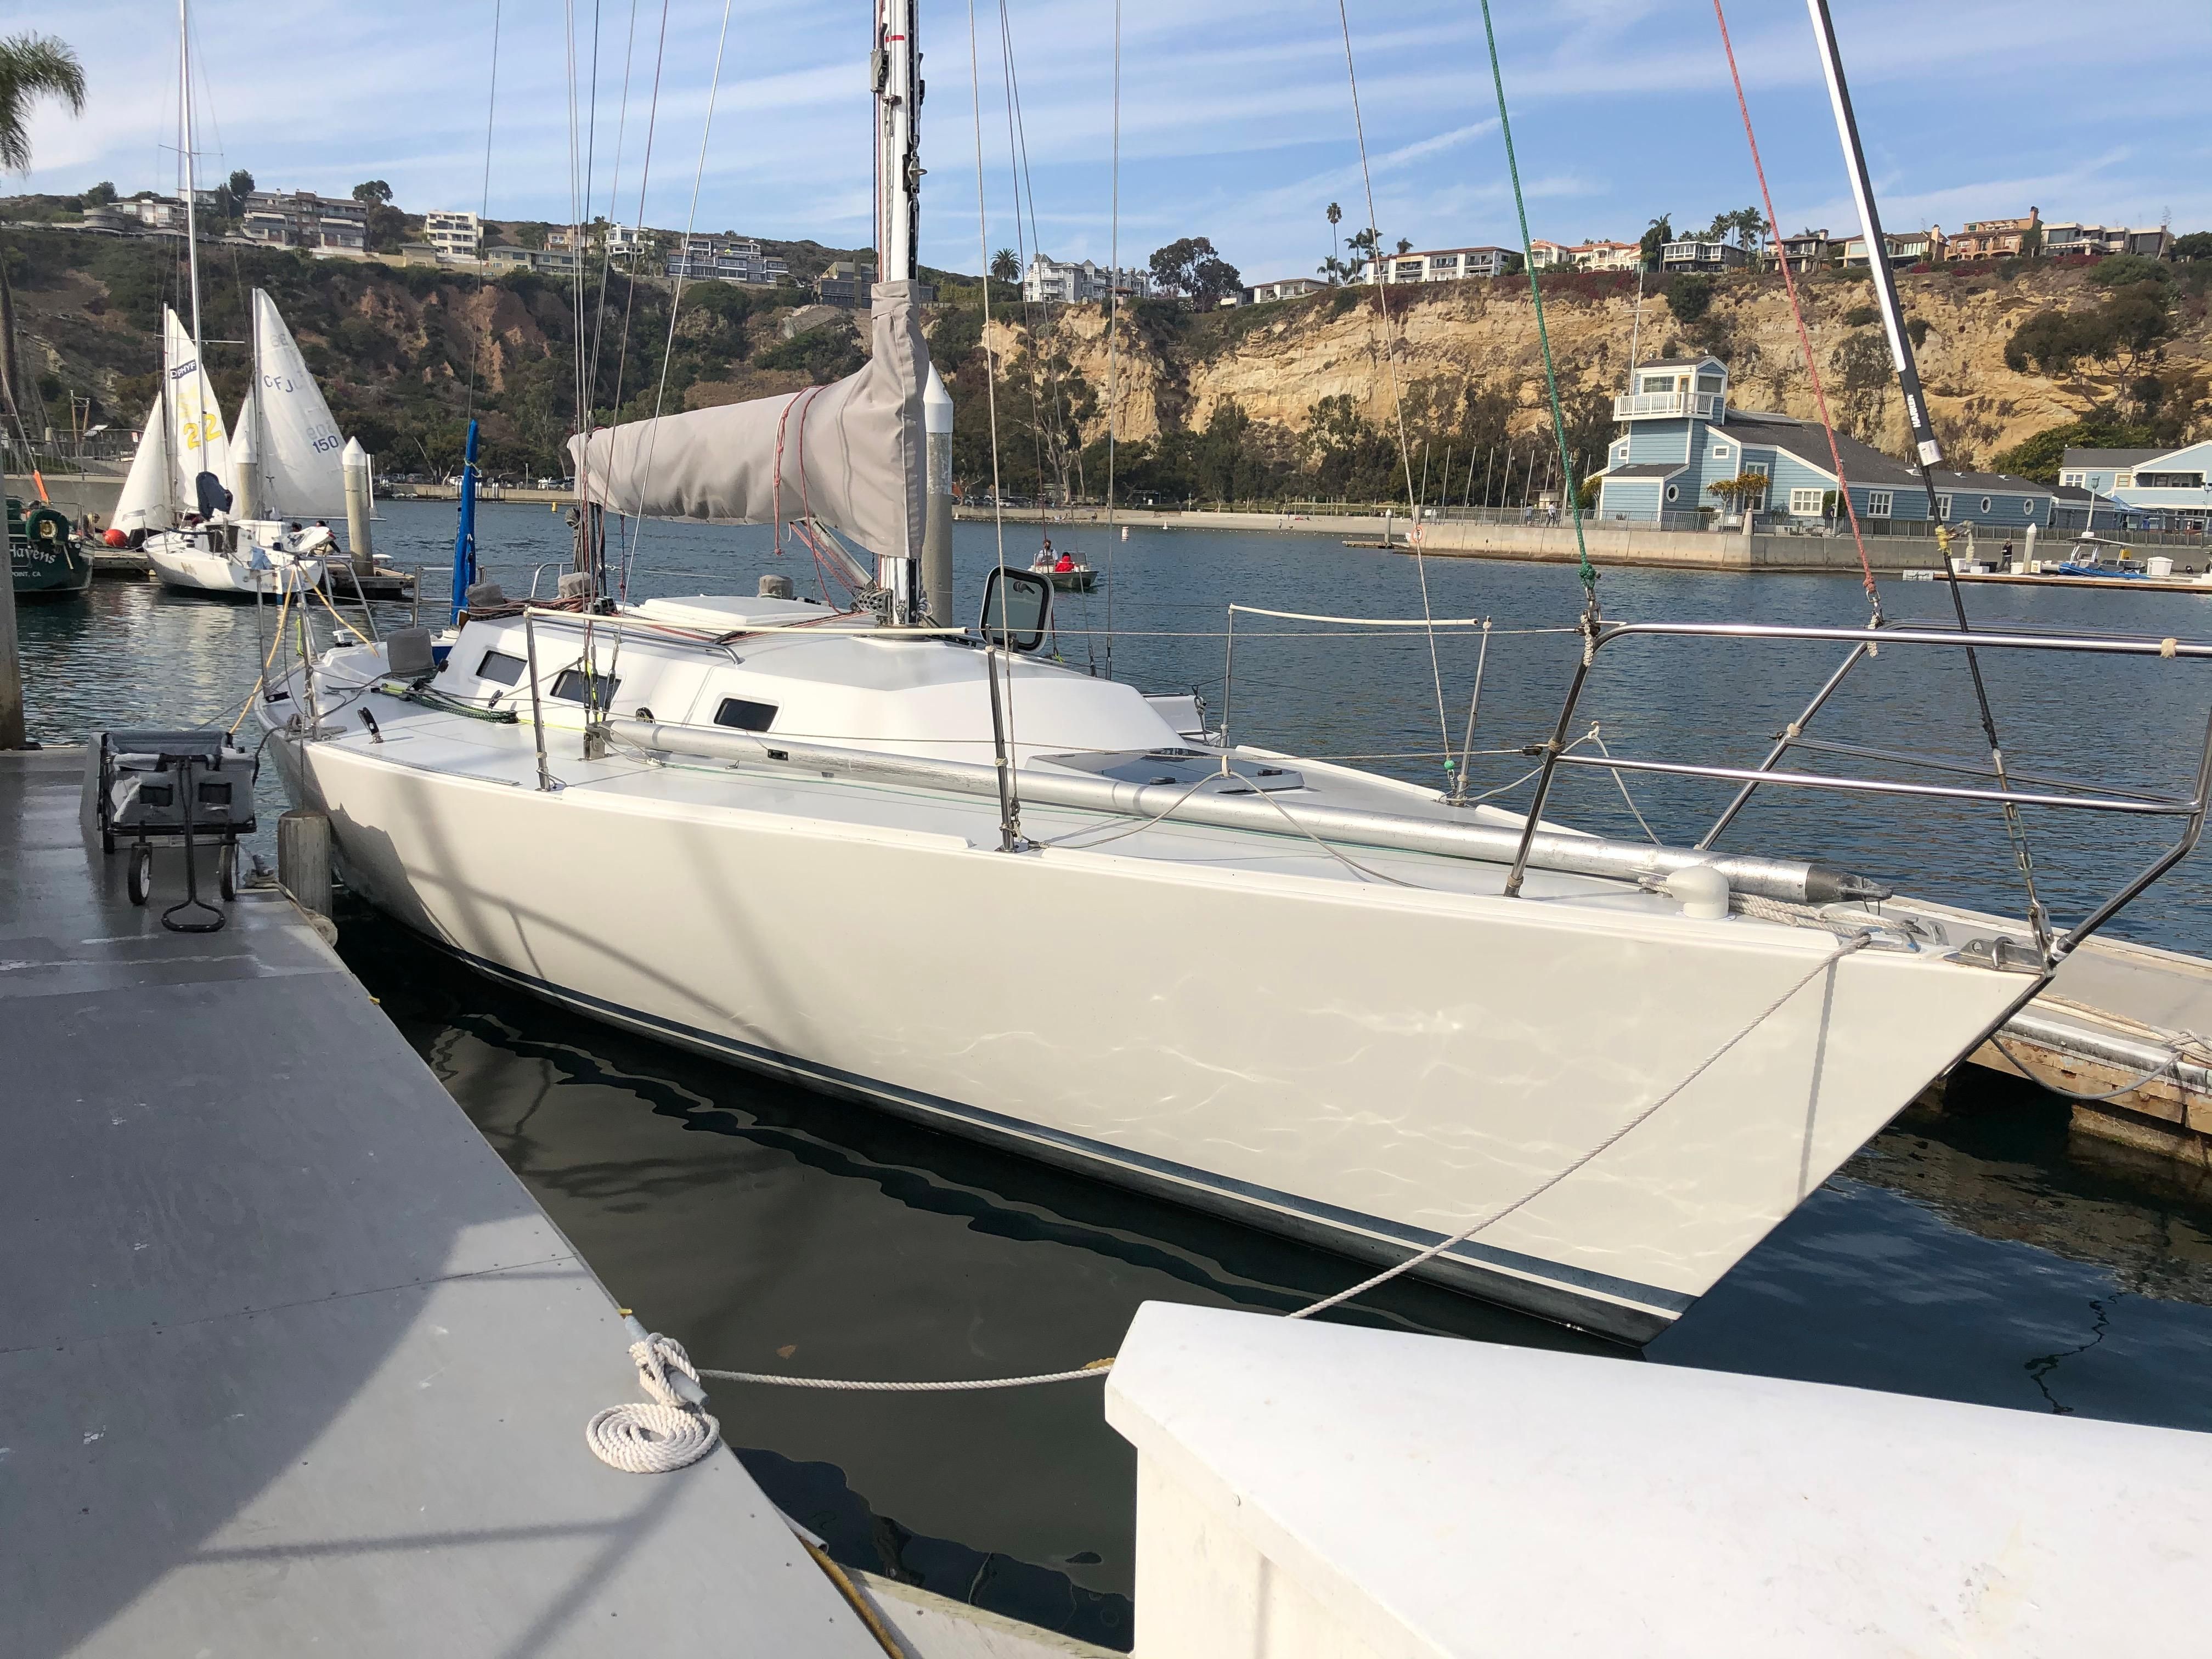 engineless sailboat for sale